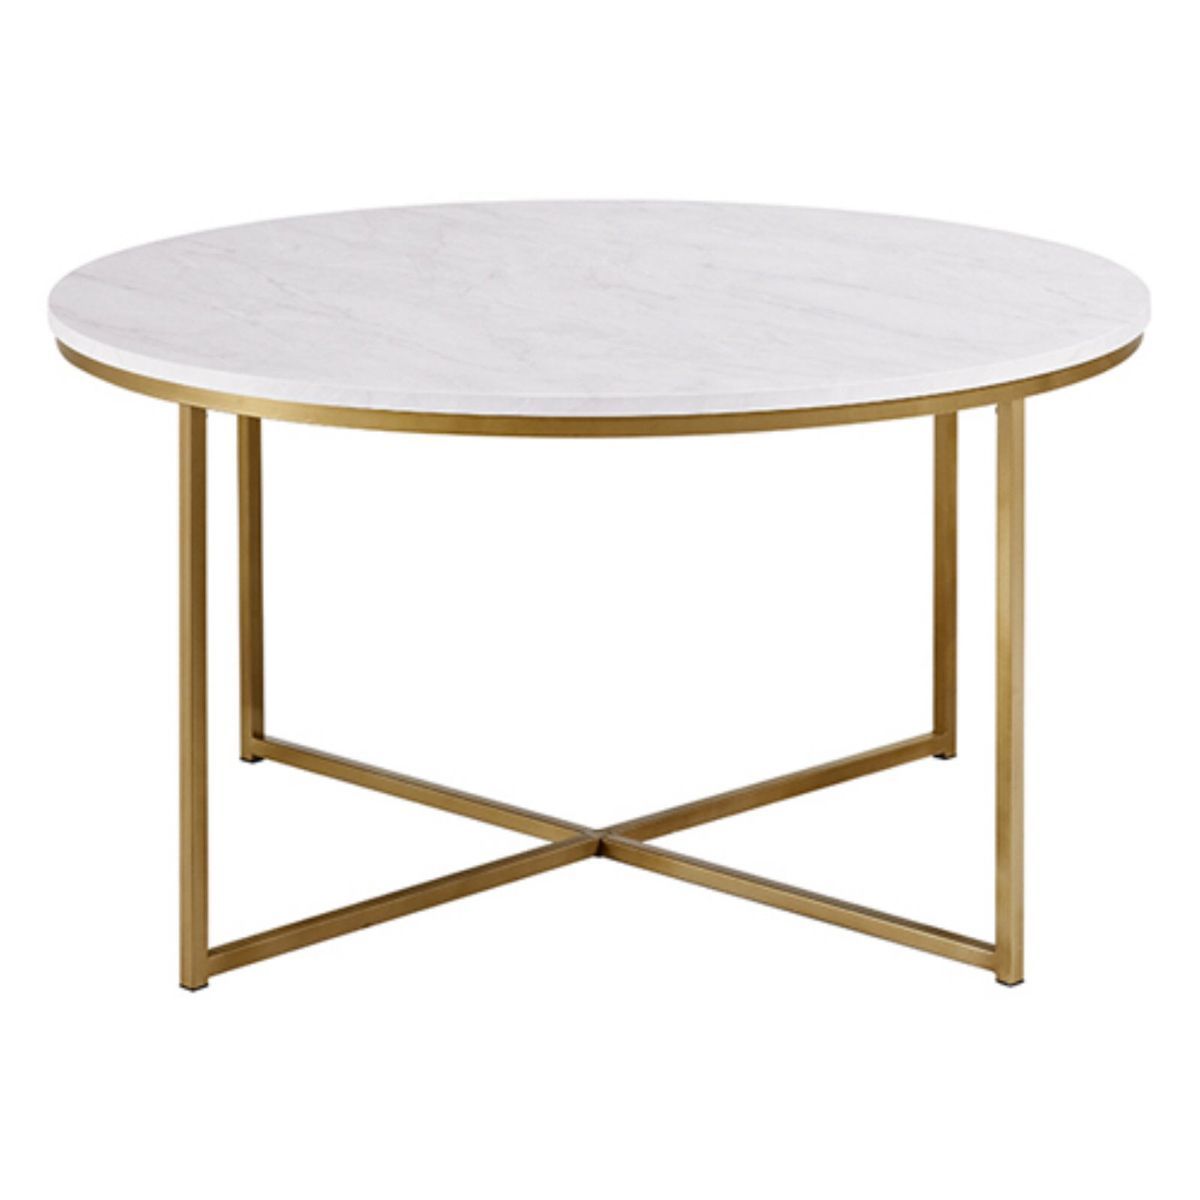 Modern Round White Faux Marble Coffee Table With Gold Base – Walmart Within Modern Round Faux Marble Coffee Tables (Gallery 8 of 20)